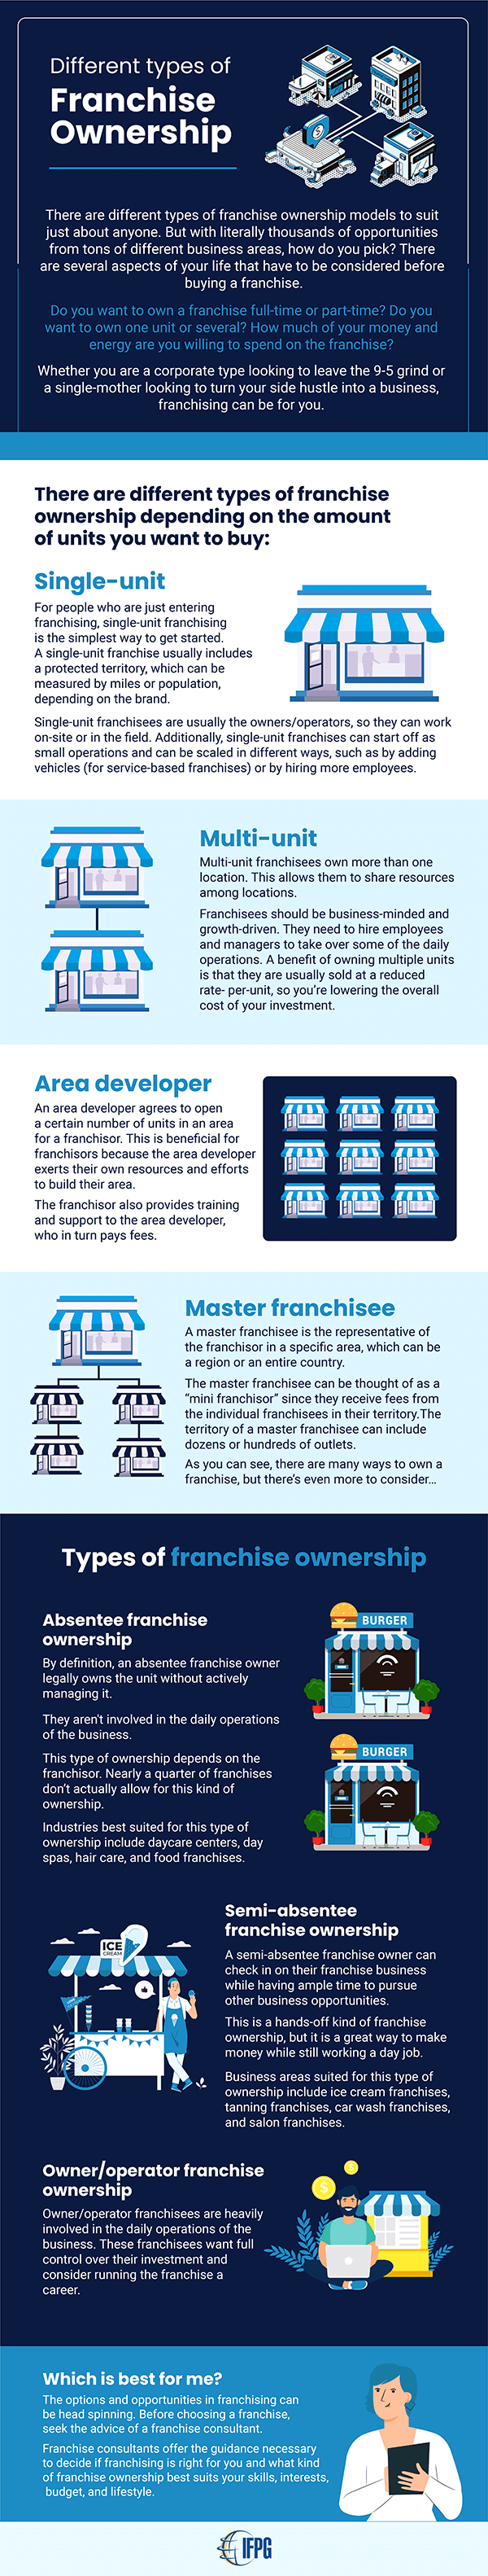 different types of franchise ownership